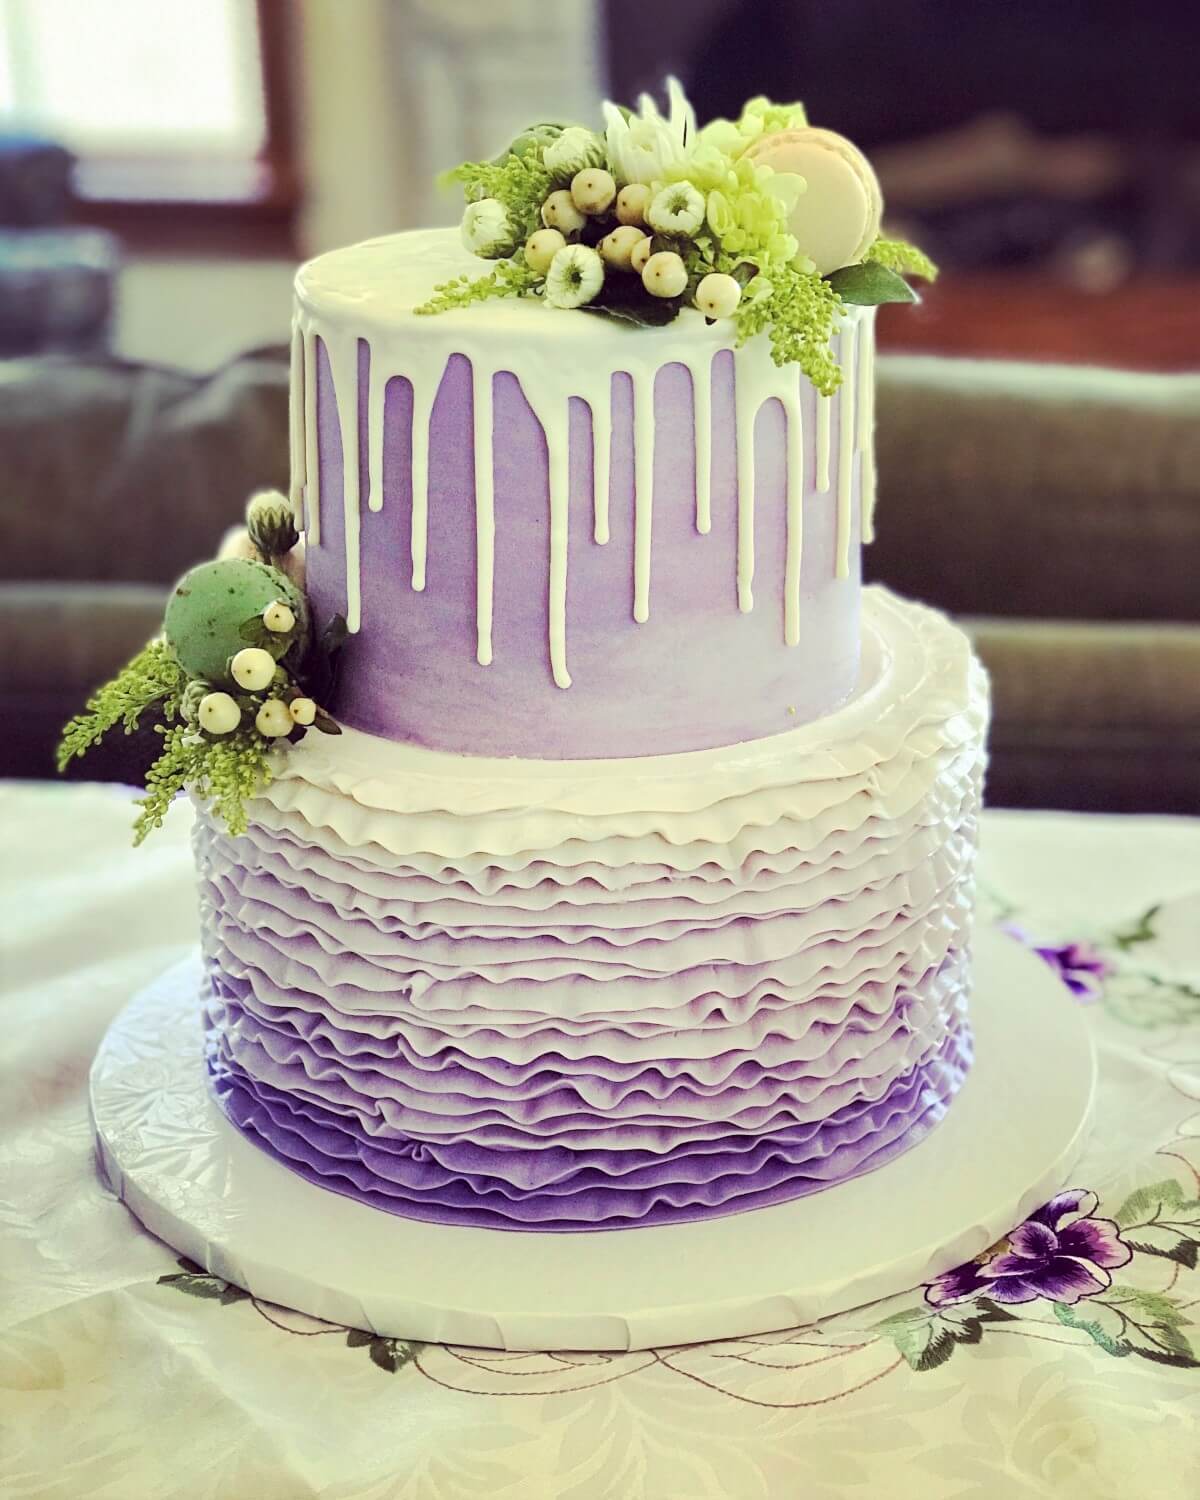 An image of a Purple Drip Cake with ruffles and flowers